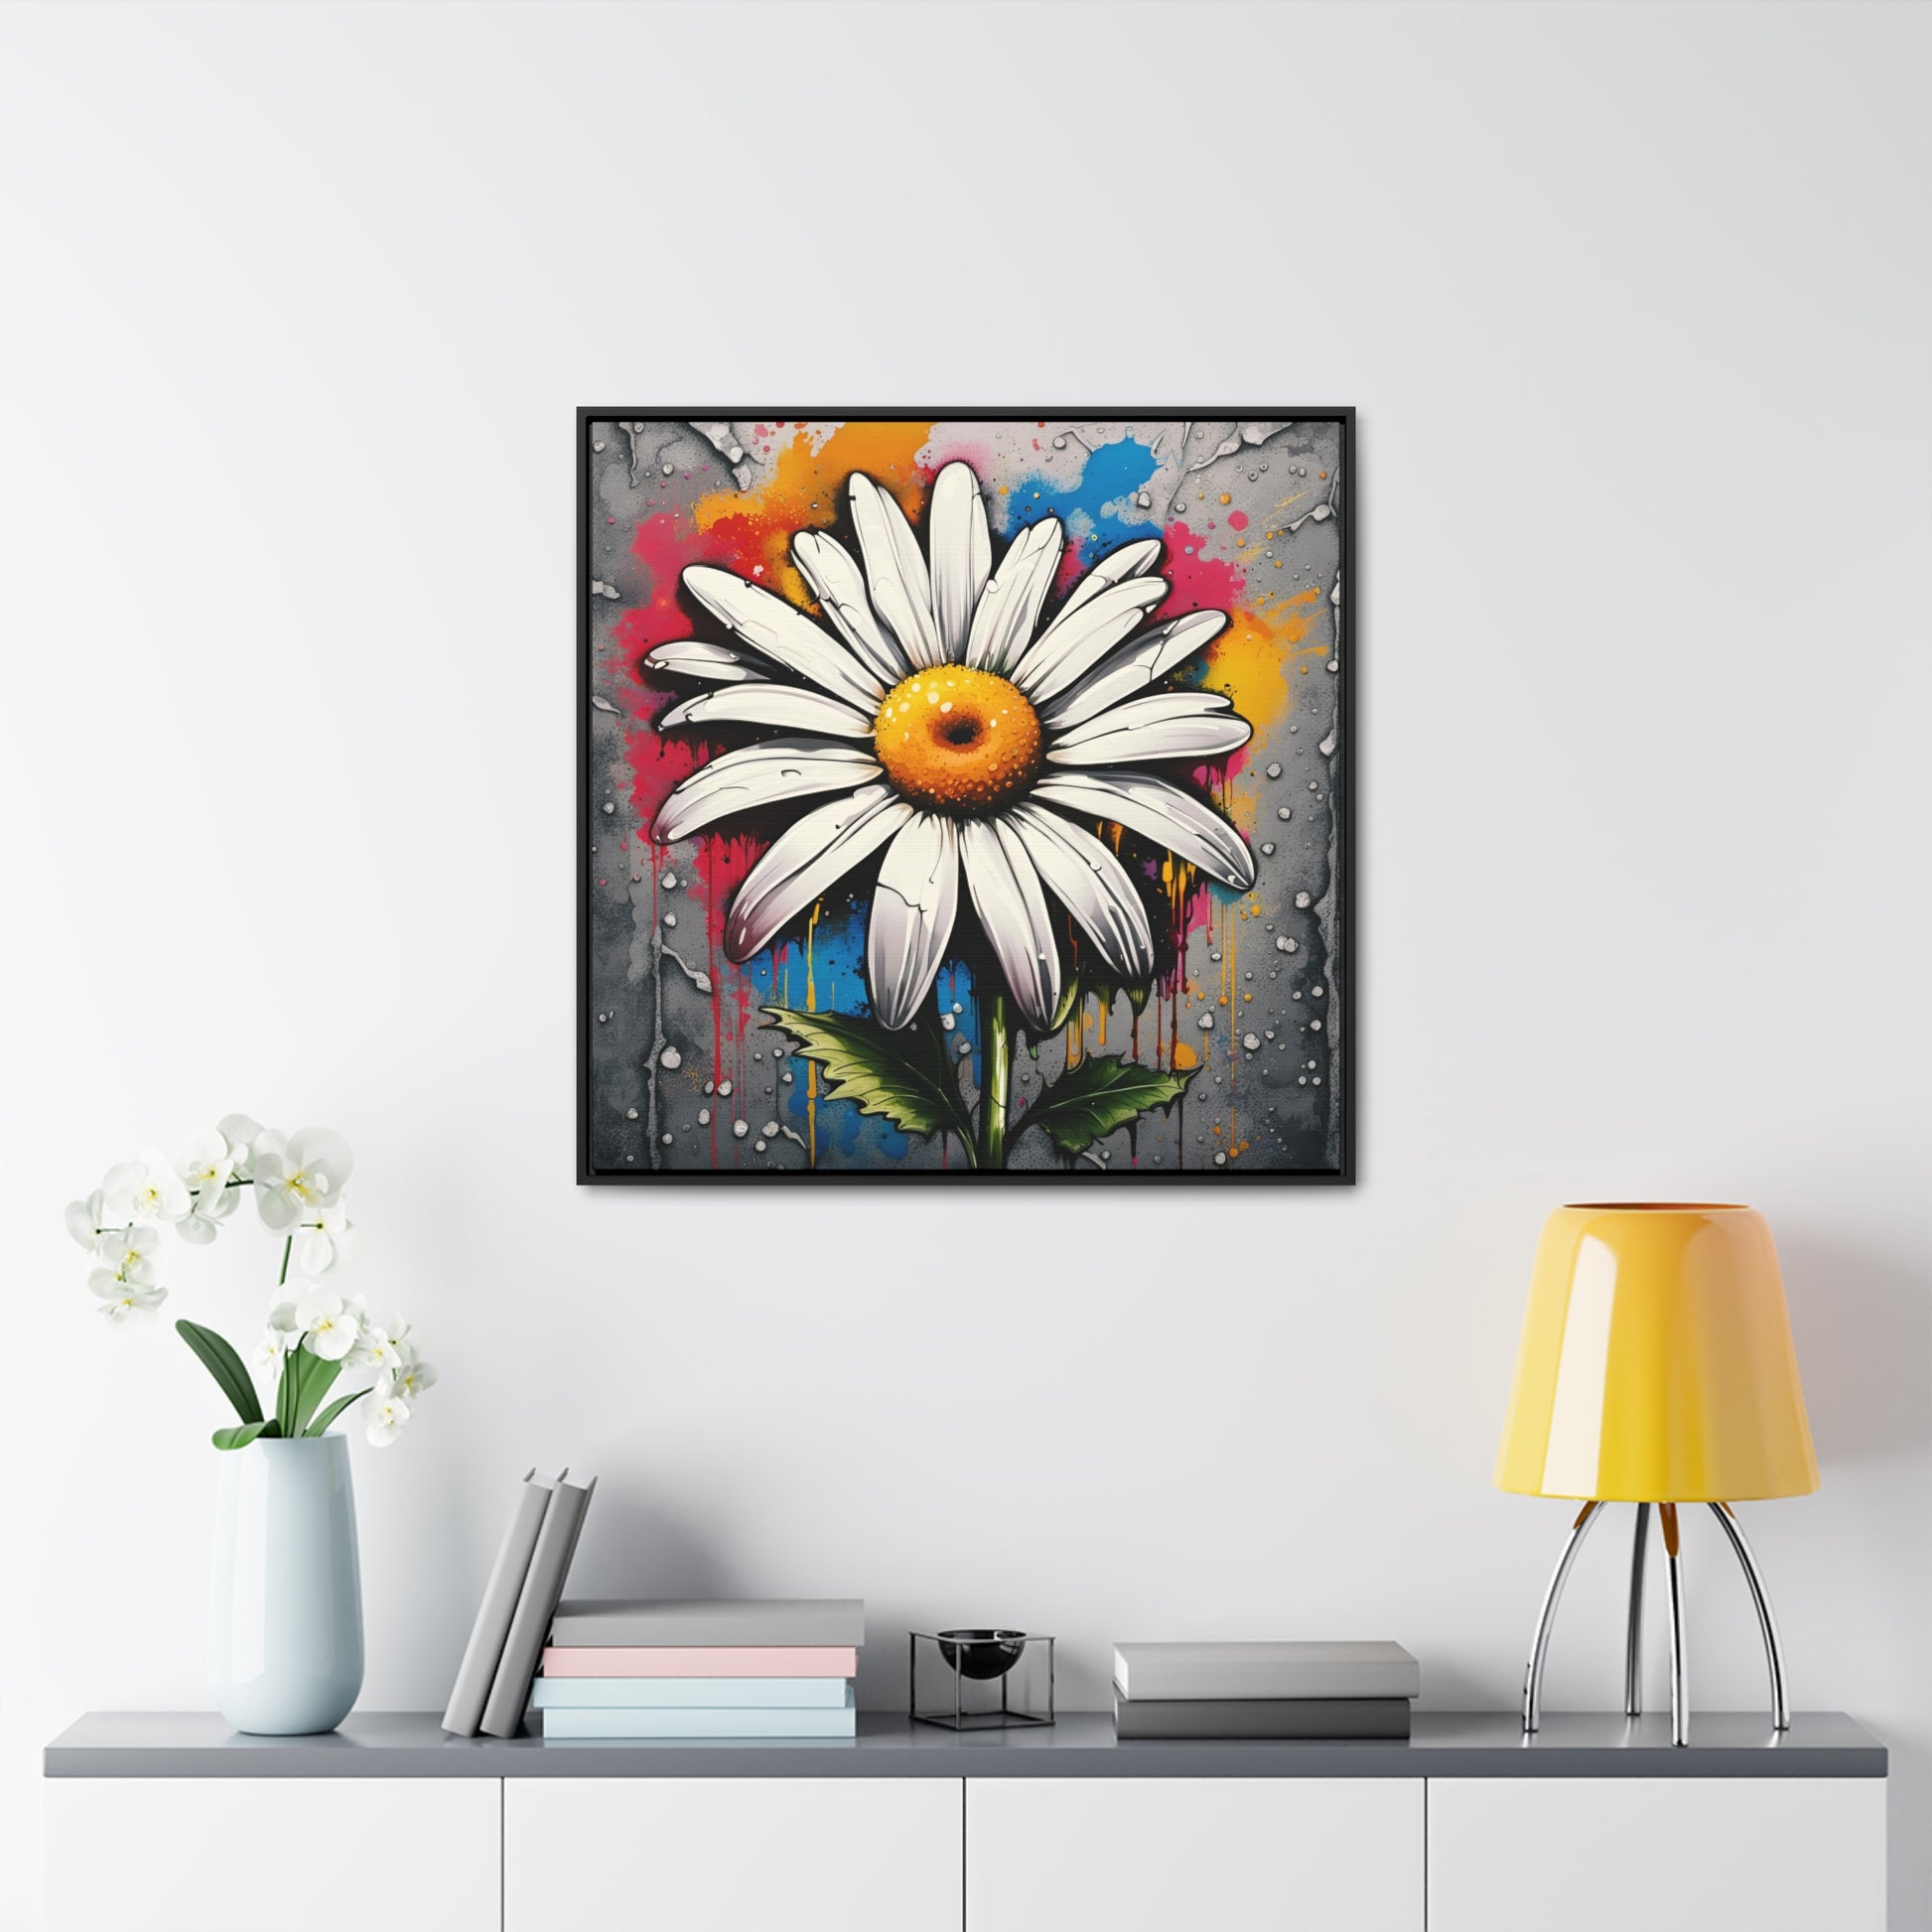 Floral themed Wall Art Print - Street Art Style Graffiti Daisy Printed on Canvas in a Floating Frame 30x30